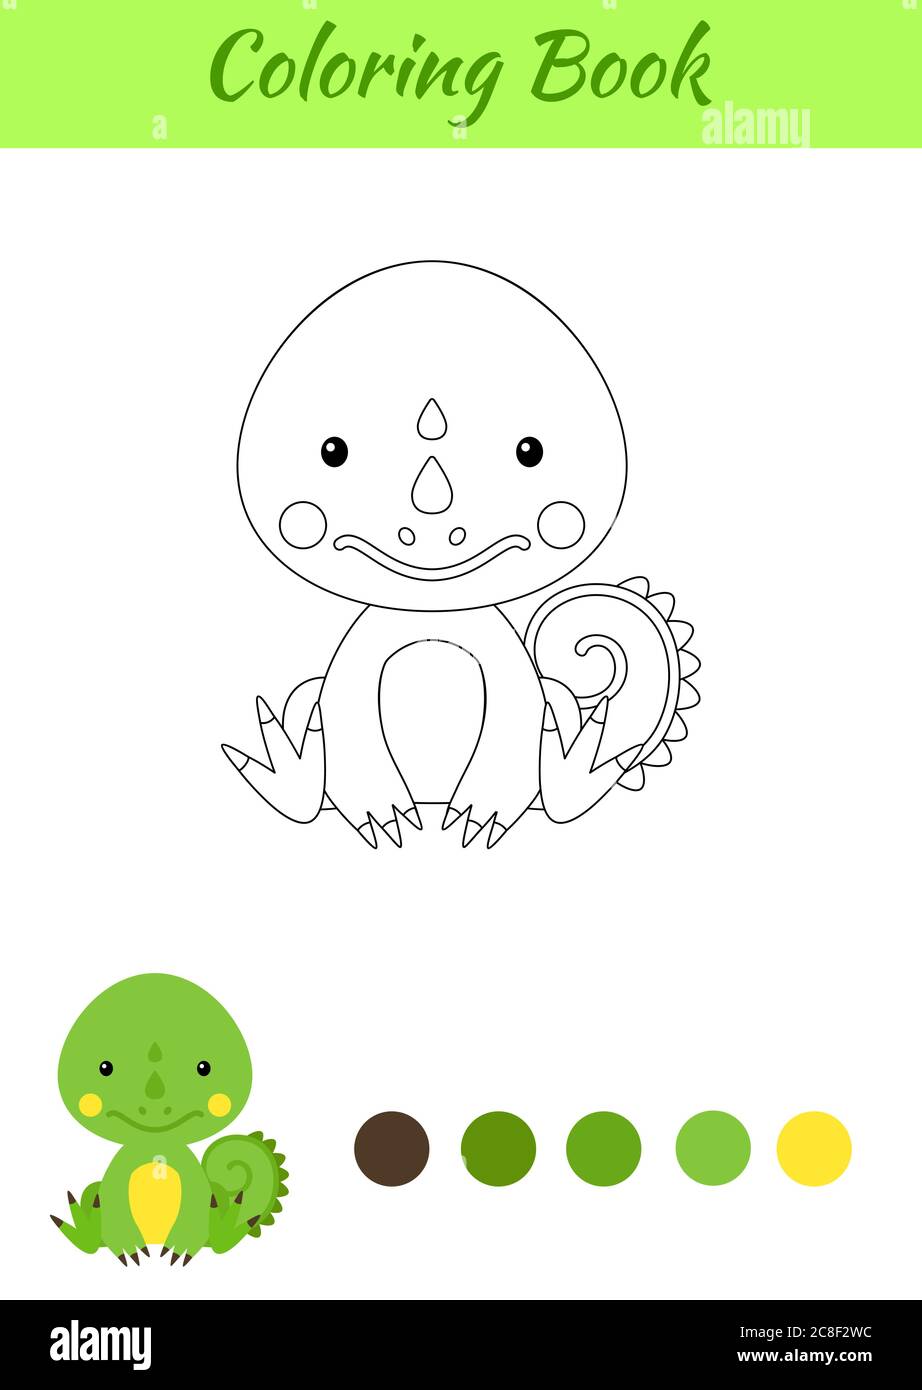 Coloring page little sitting baby iguana. Coloring book for kids. Educational activity for preschool years kids and toddlers with cute animal. Stock Vector